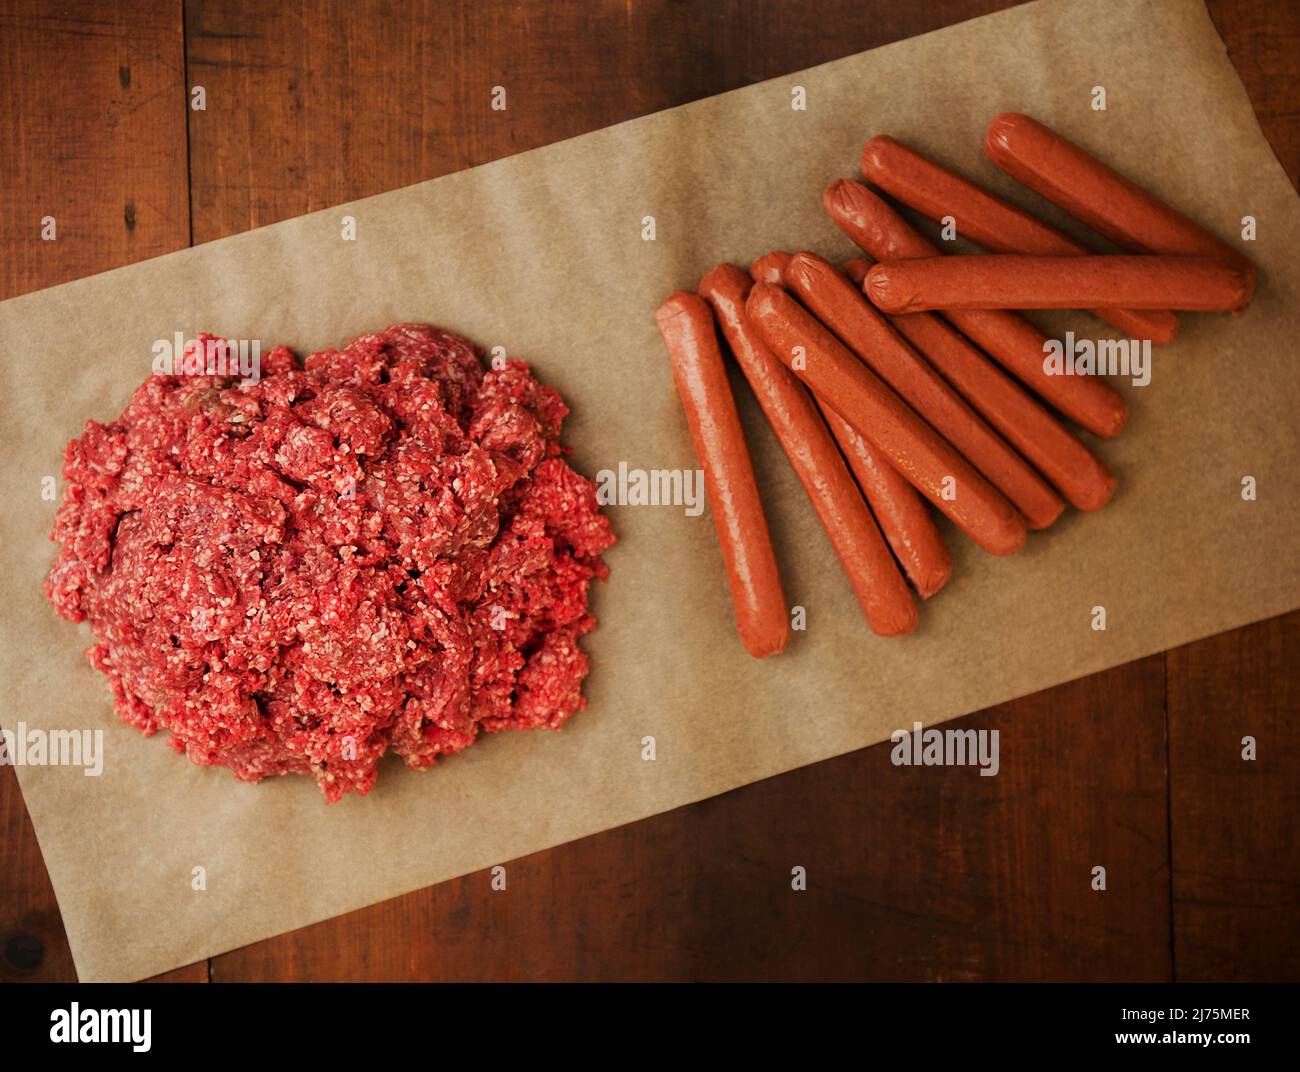 Raw Ground Burger and Hotdogs on Parchment Paper Stock Photo